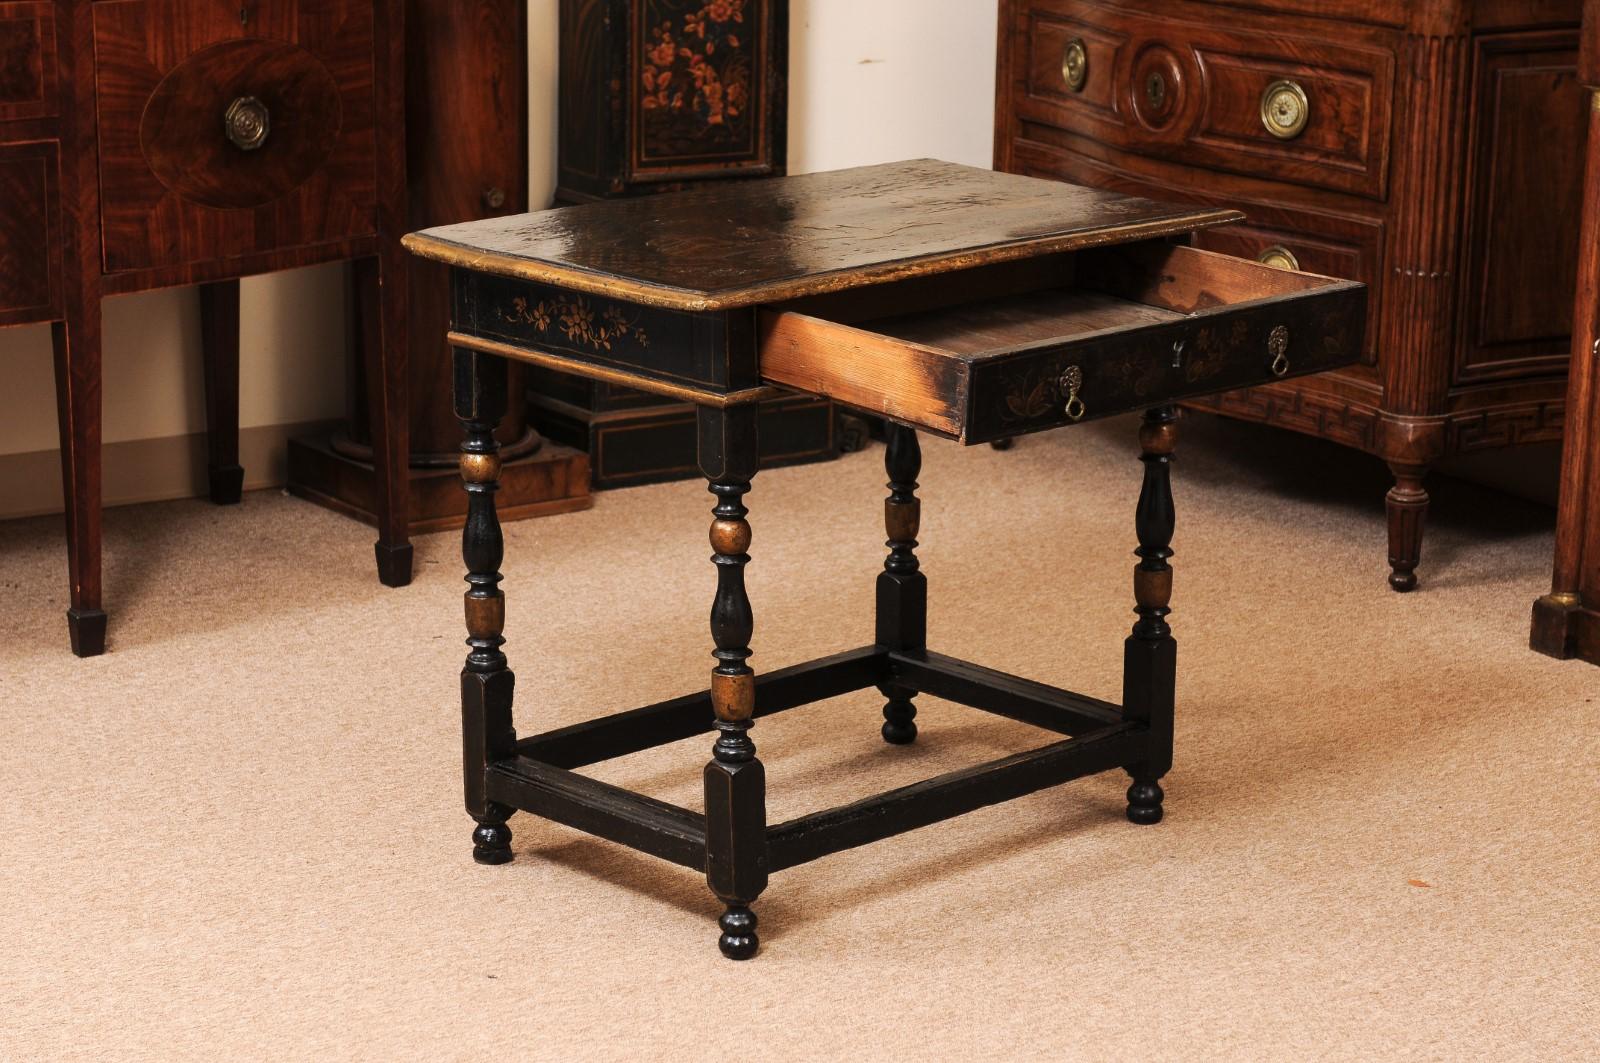 European 18th Century English Chinoiserie Decorated Side Table with Drawer, Turned Legs & For Sale